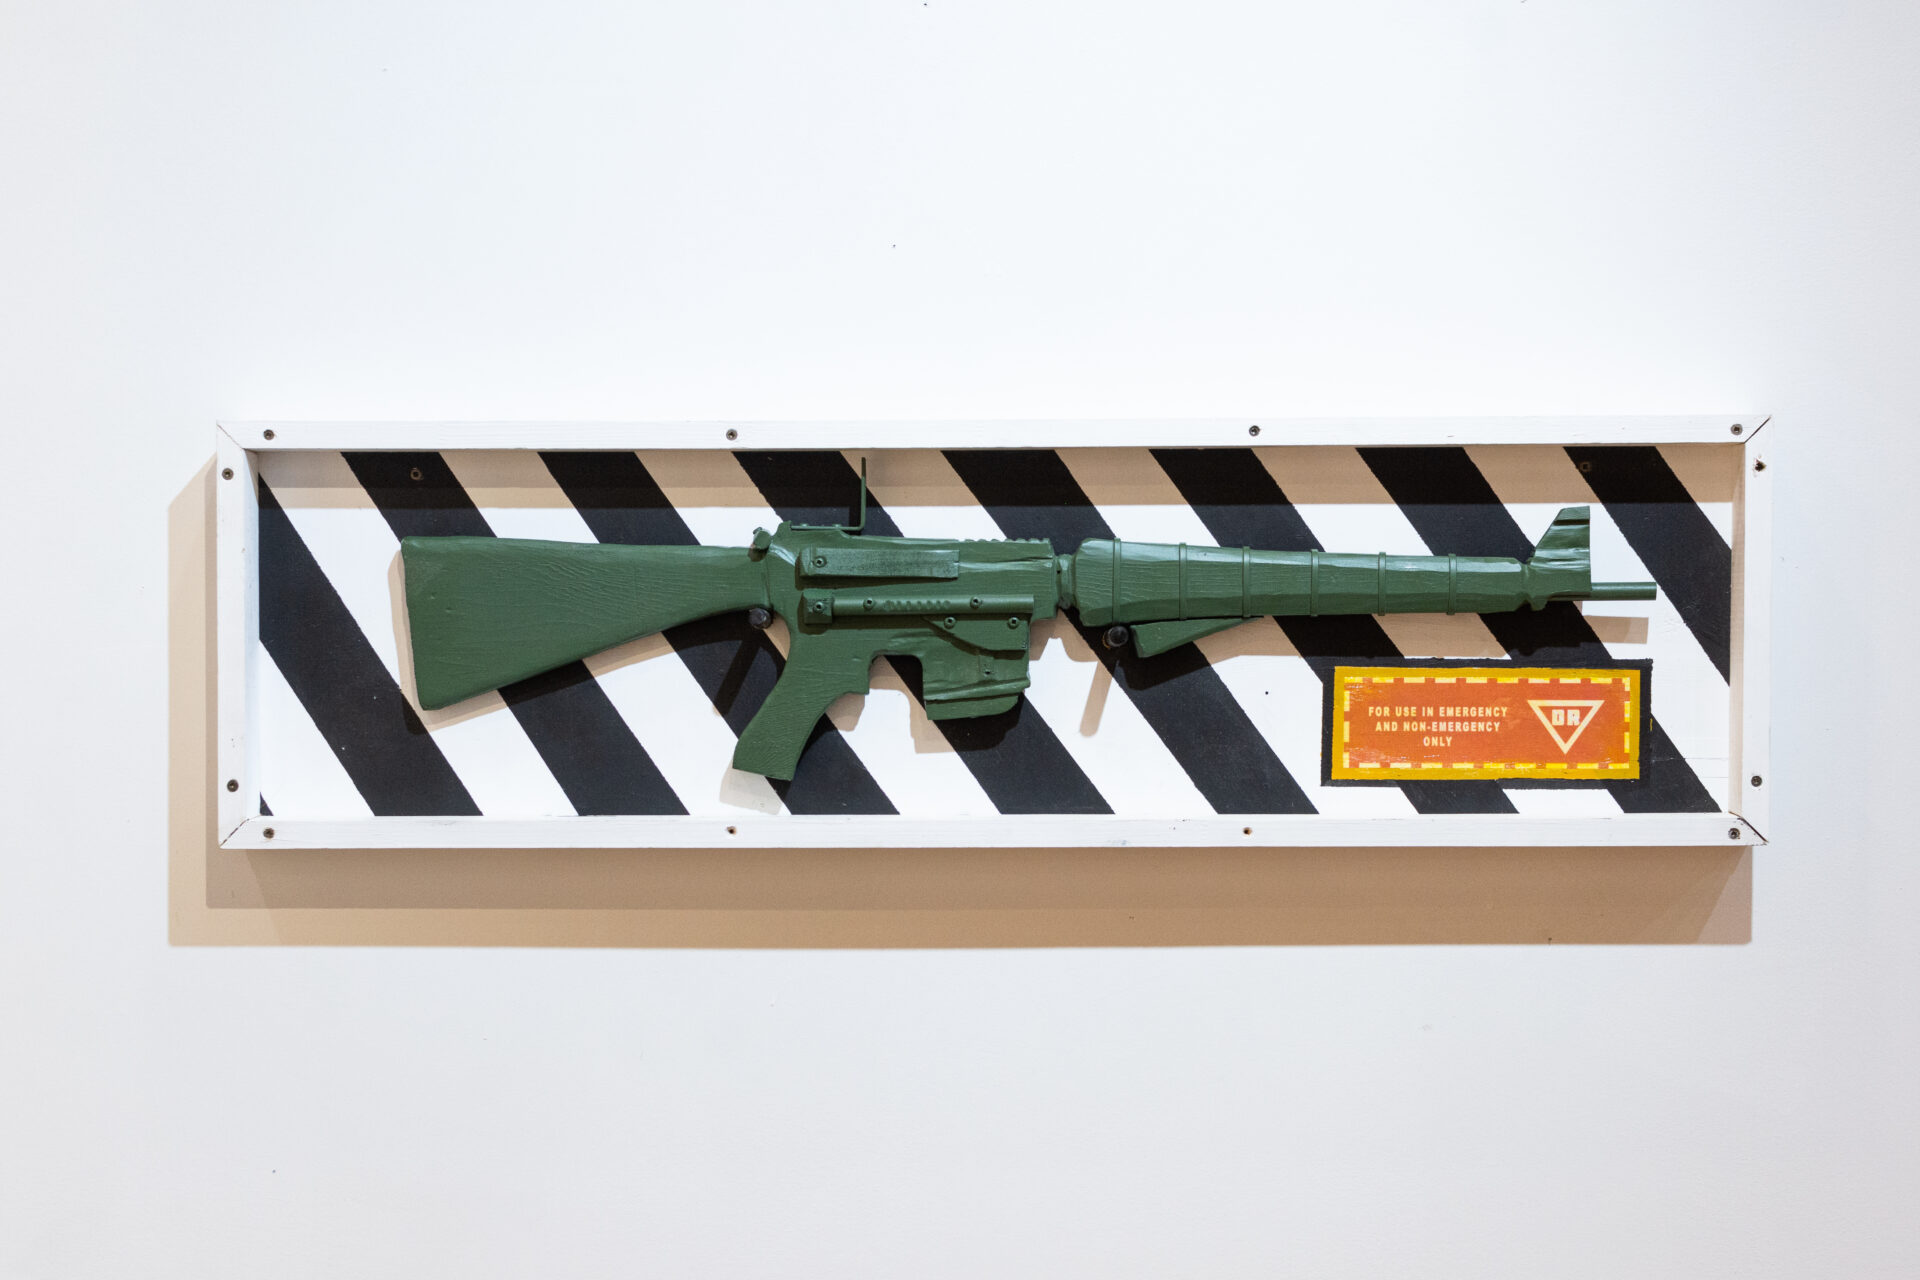 image of a painting by whit montgomery with a green rifle